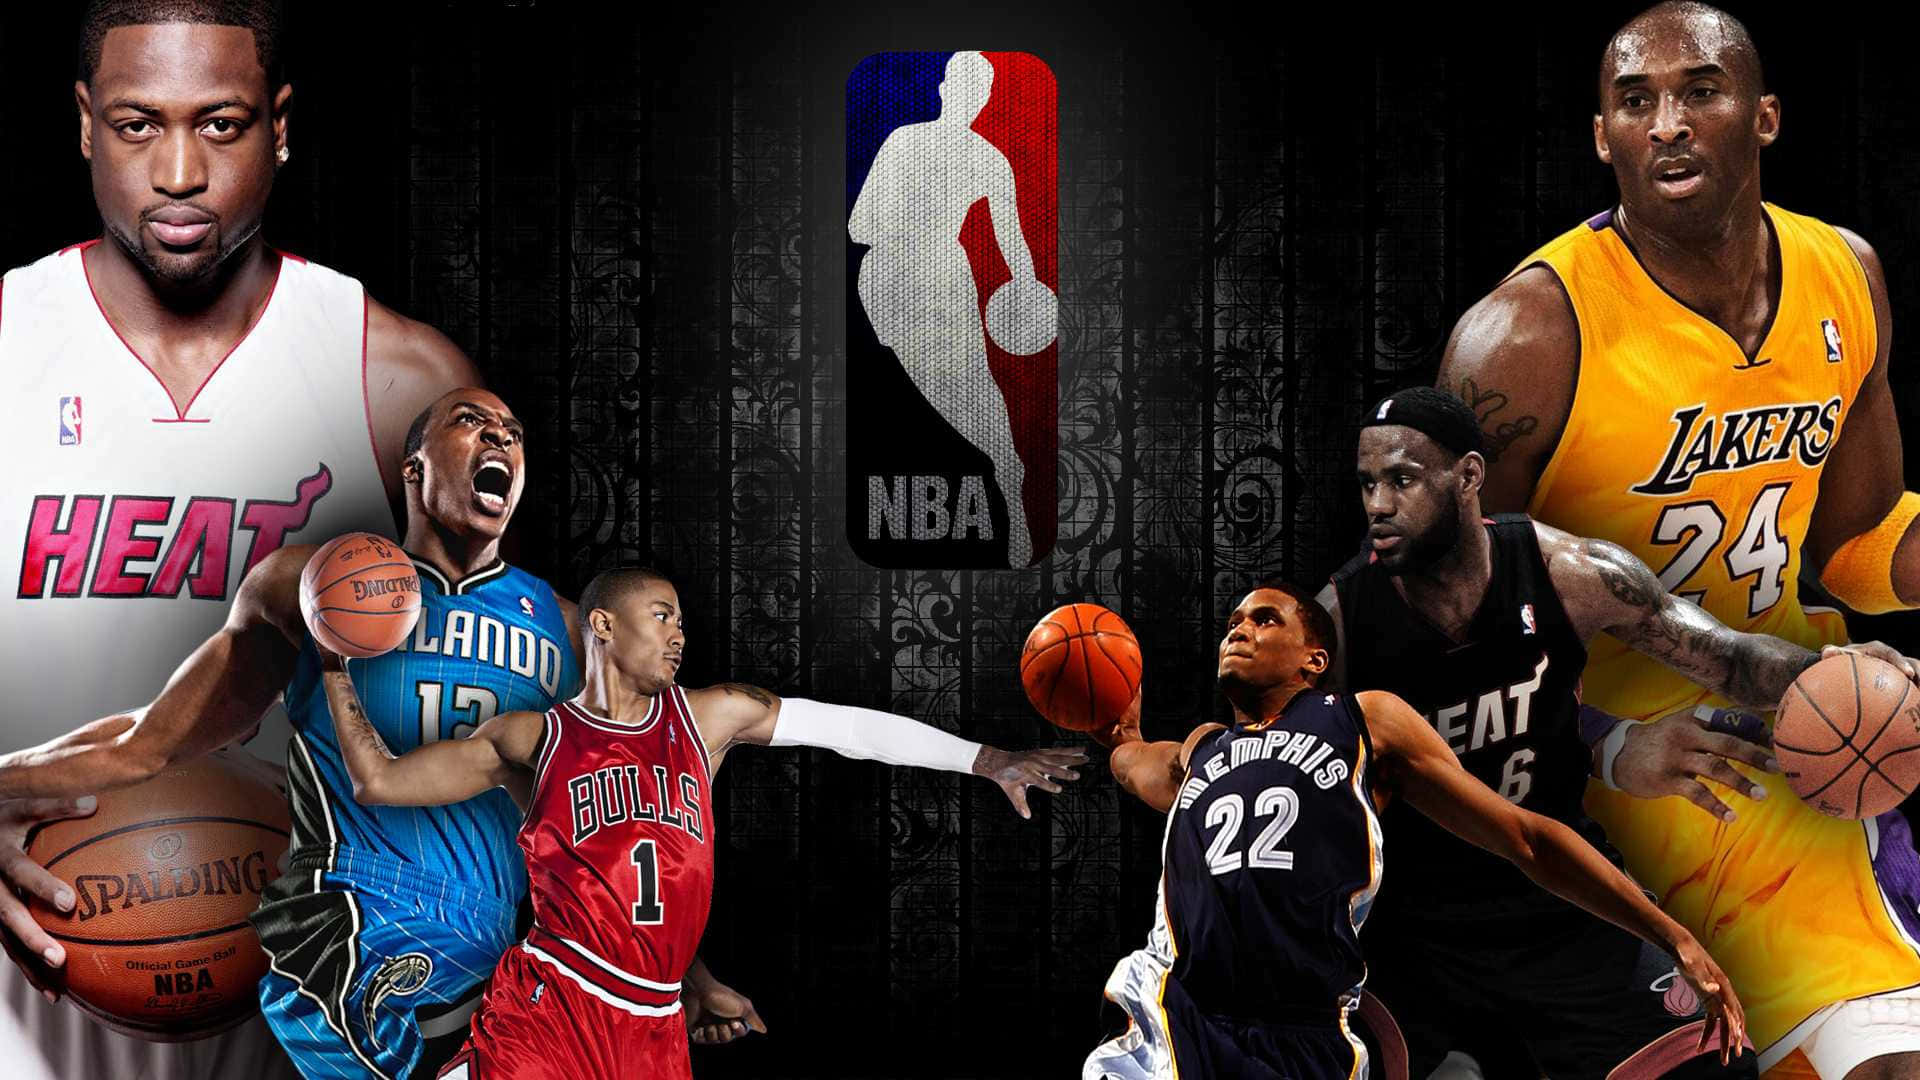 Celebrating The Best Of The Nba! Background